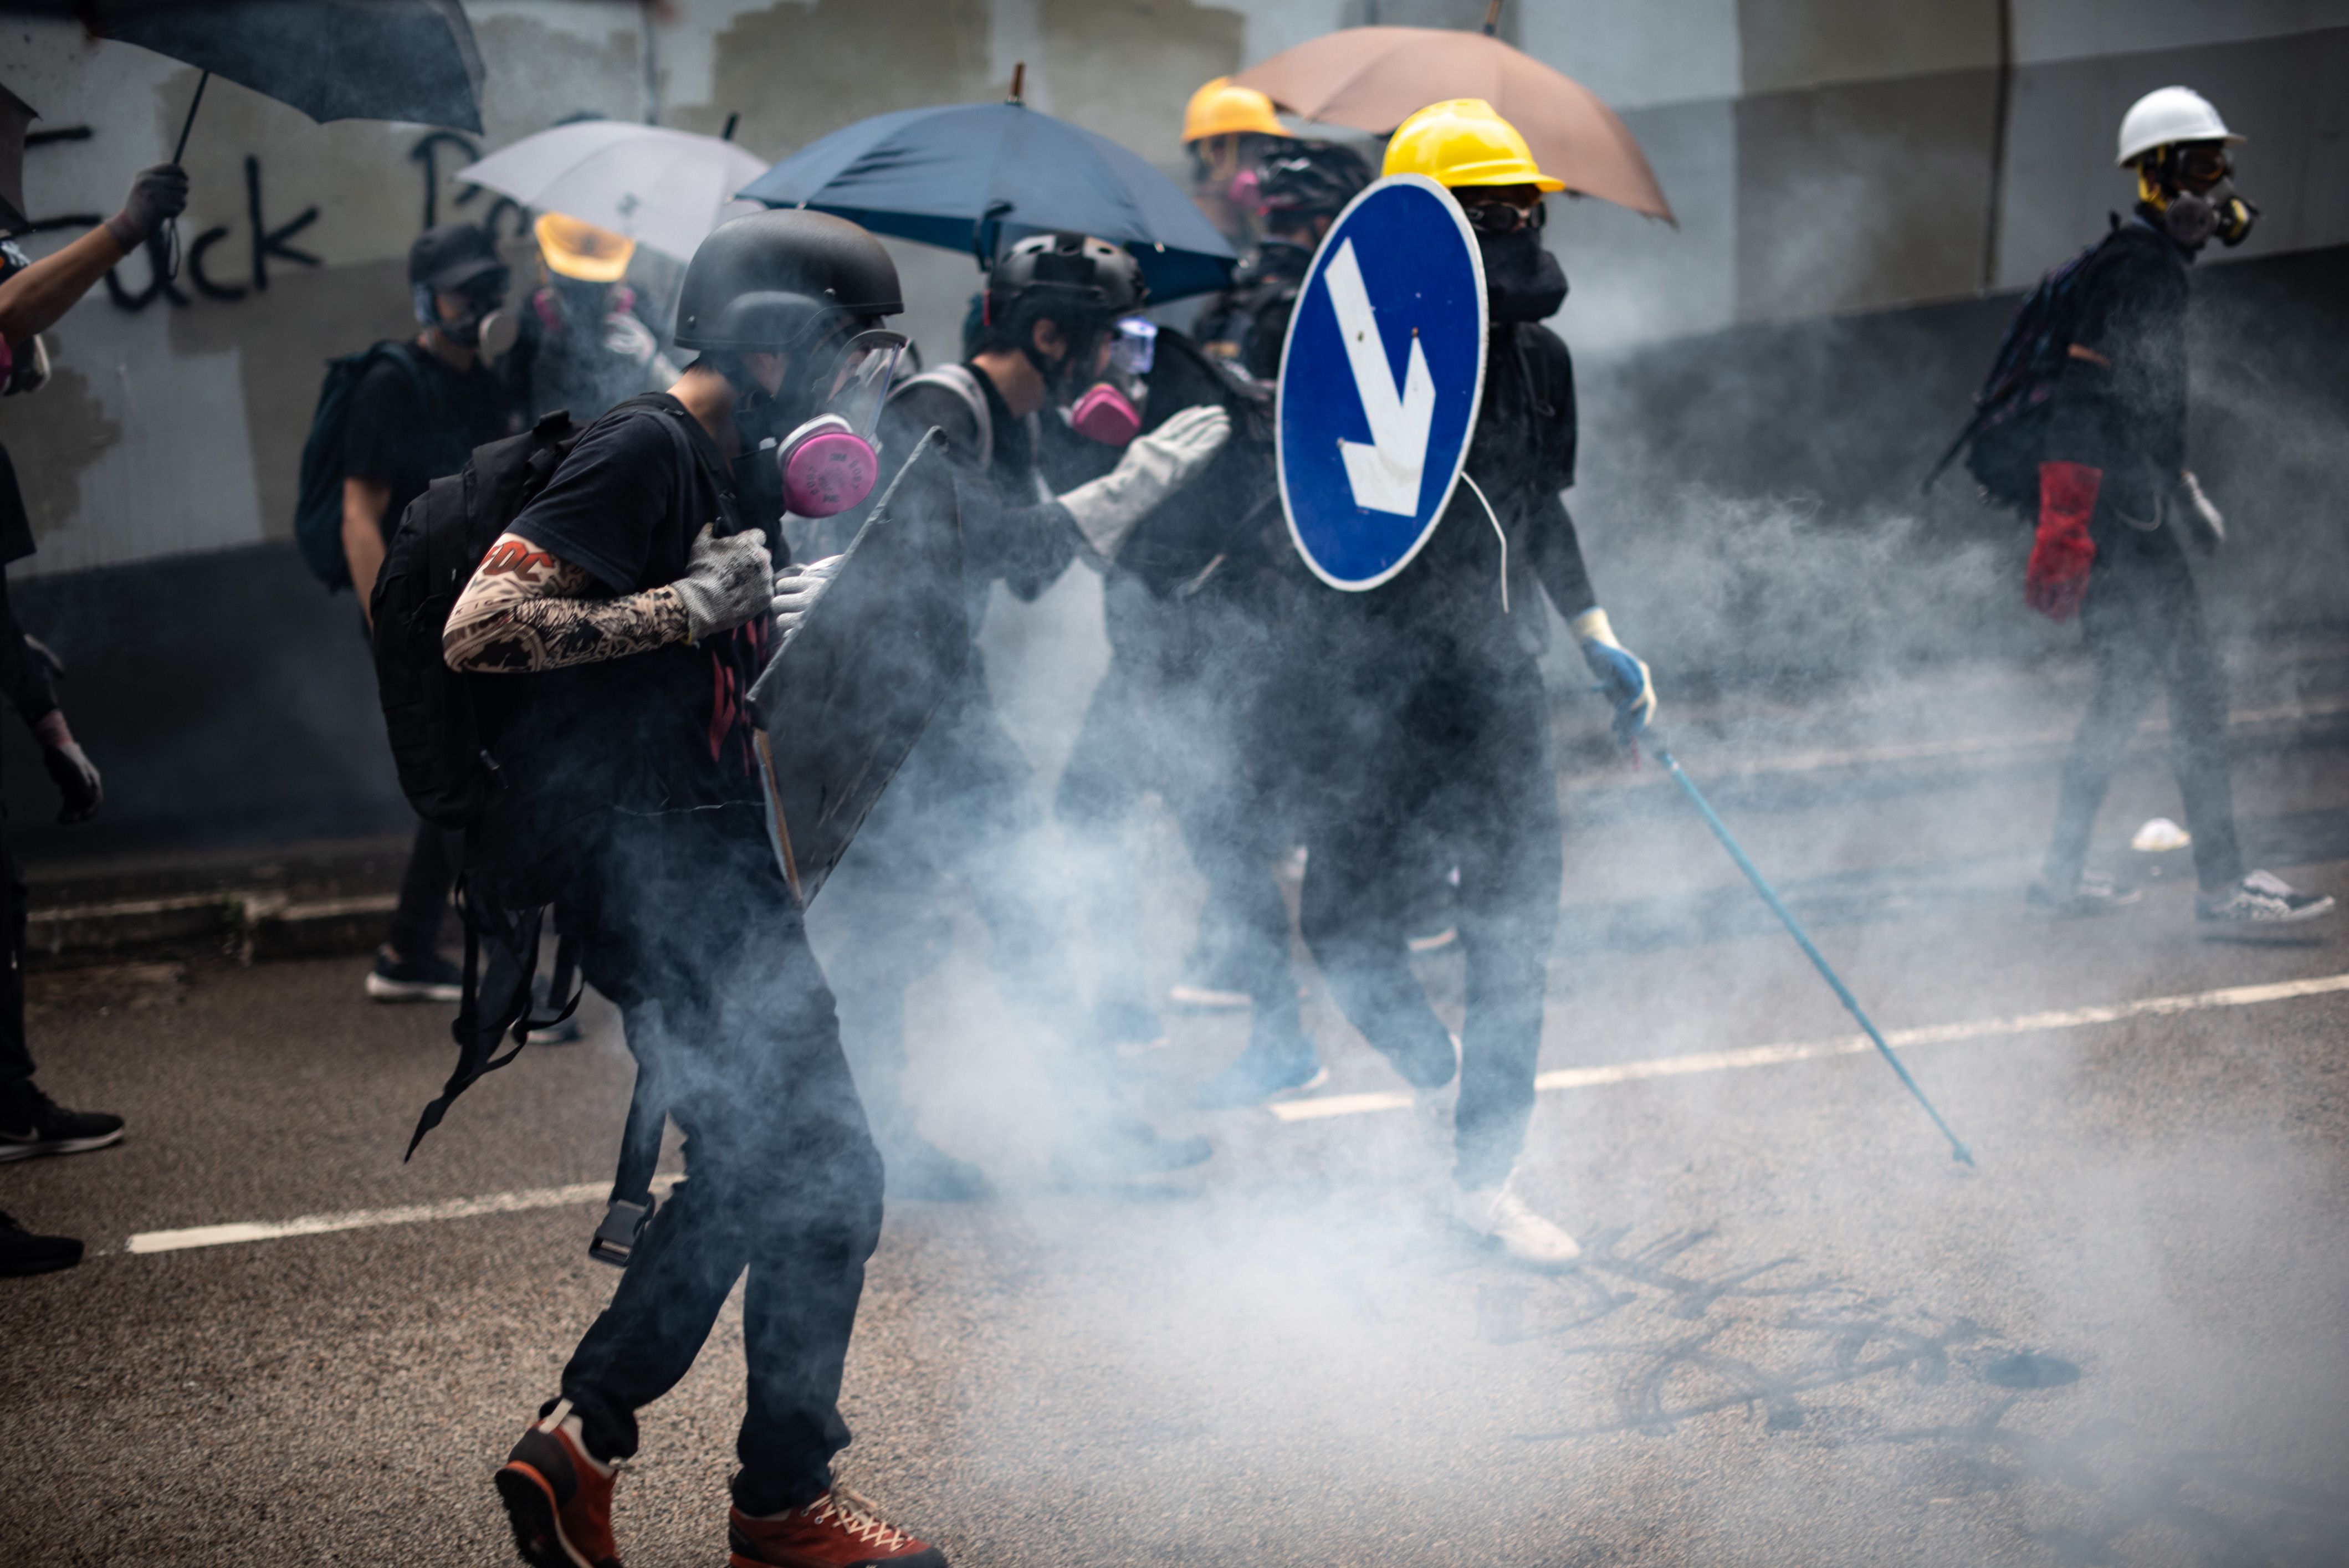 Protesters react after police fired tear gas outside the government headquarters in Hong Kong